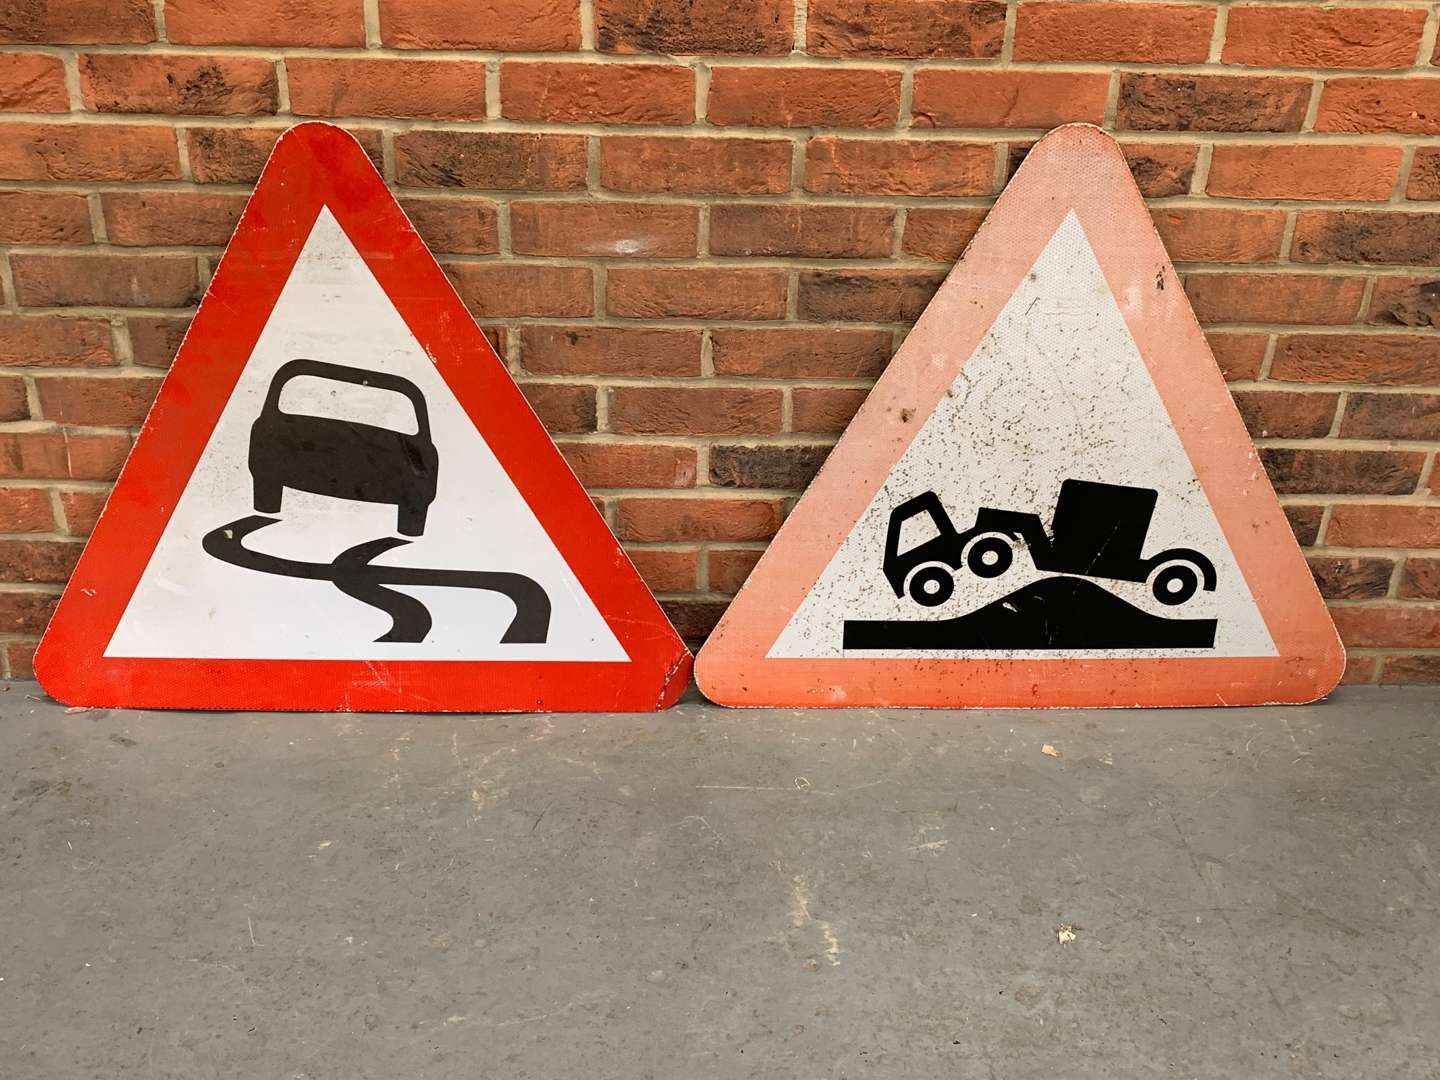 <p>Two Triangular Road Warning Signs</p>